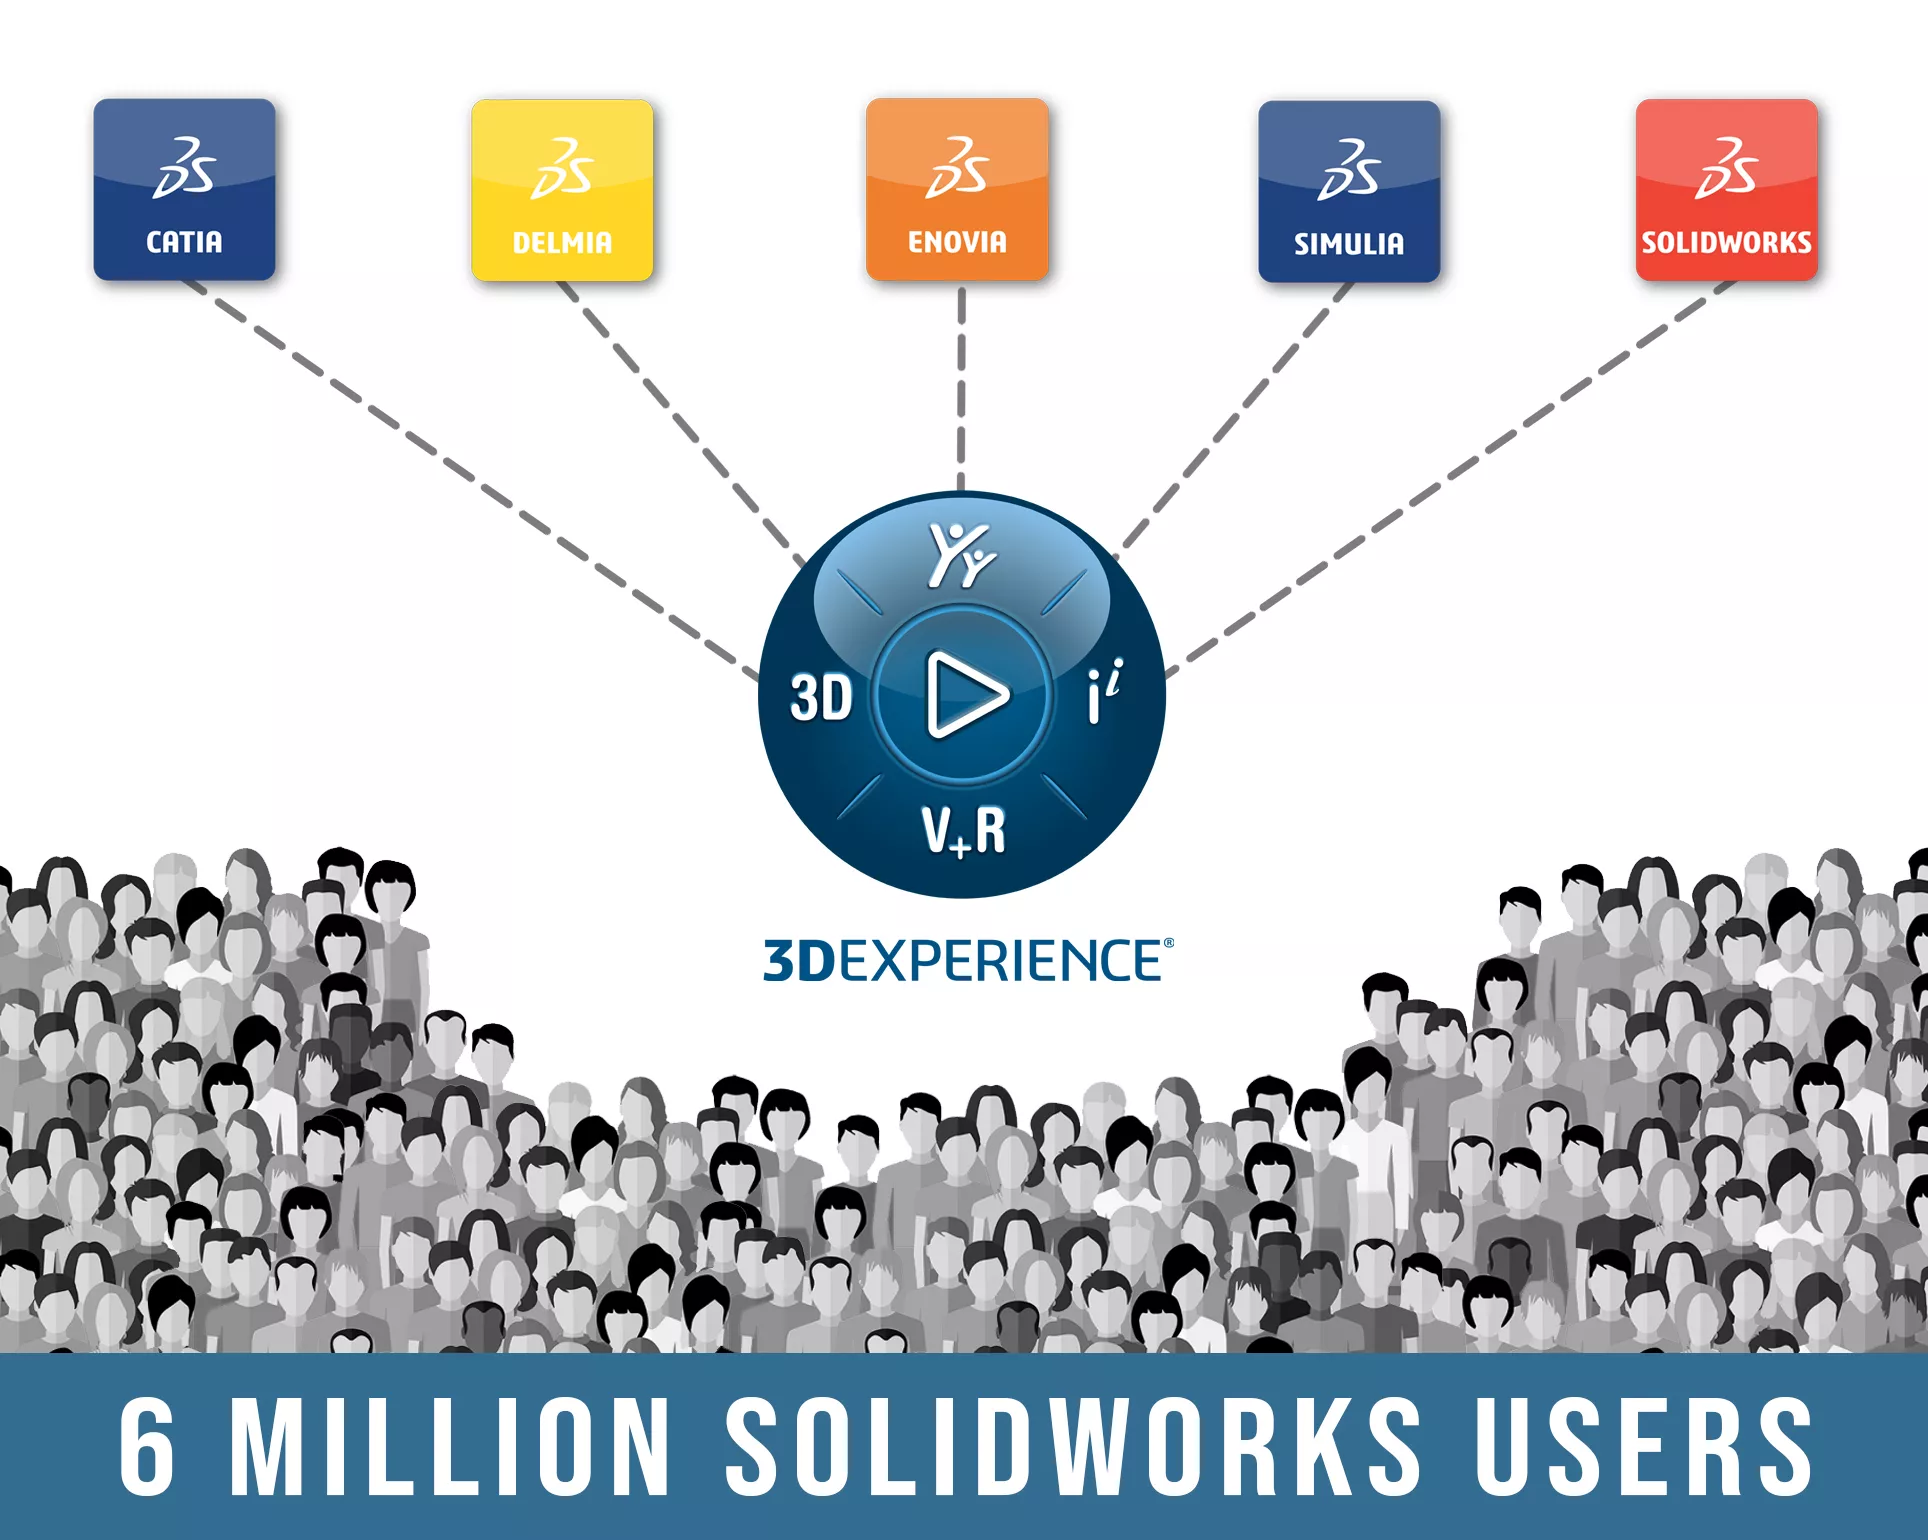 Learn how 3DEXPERIENCE utilizes the most powerful design tools available on one platform to help you choose the right solution for your team. 